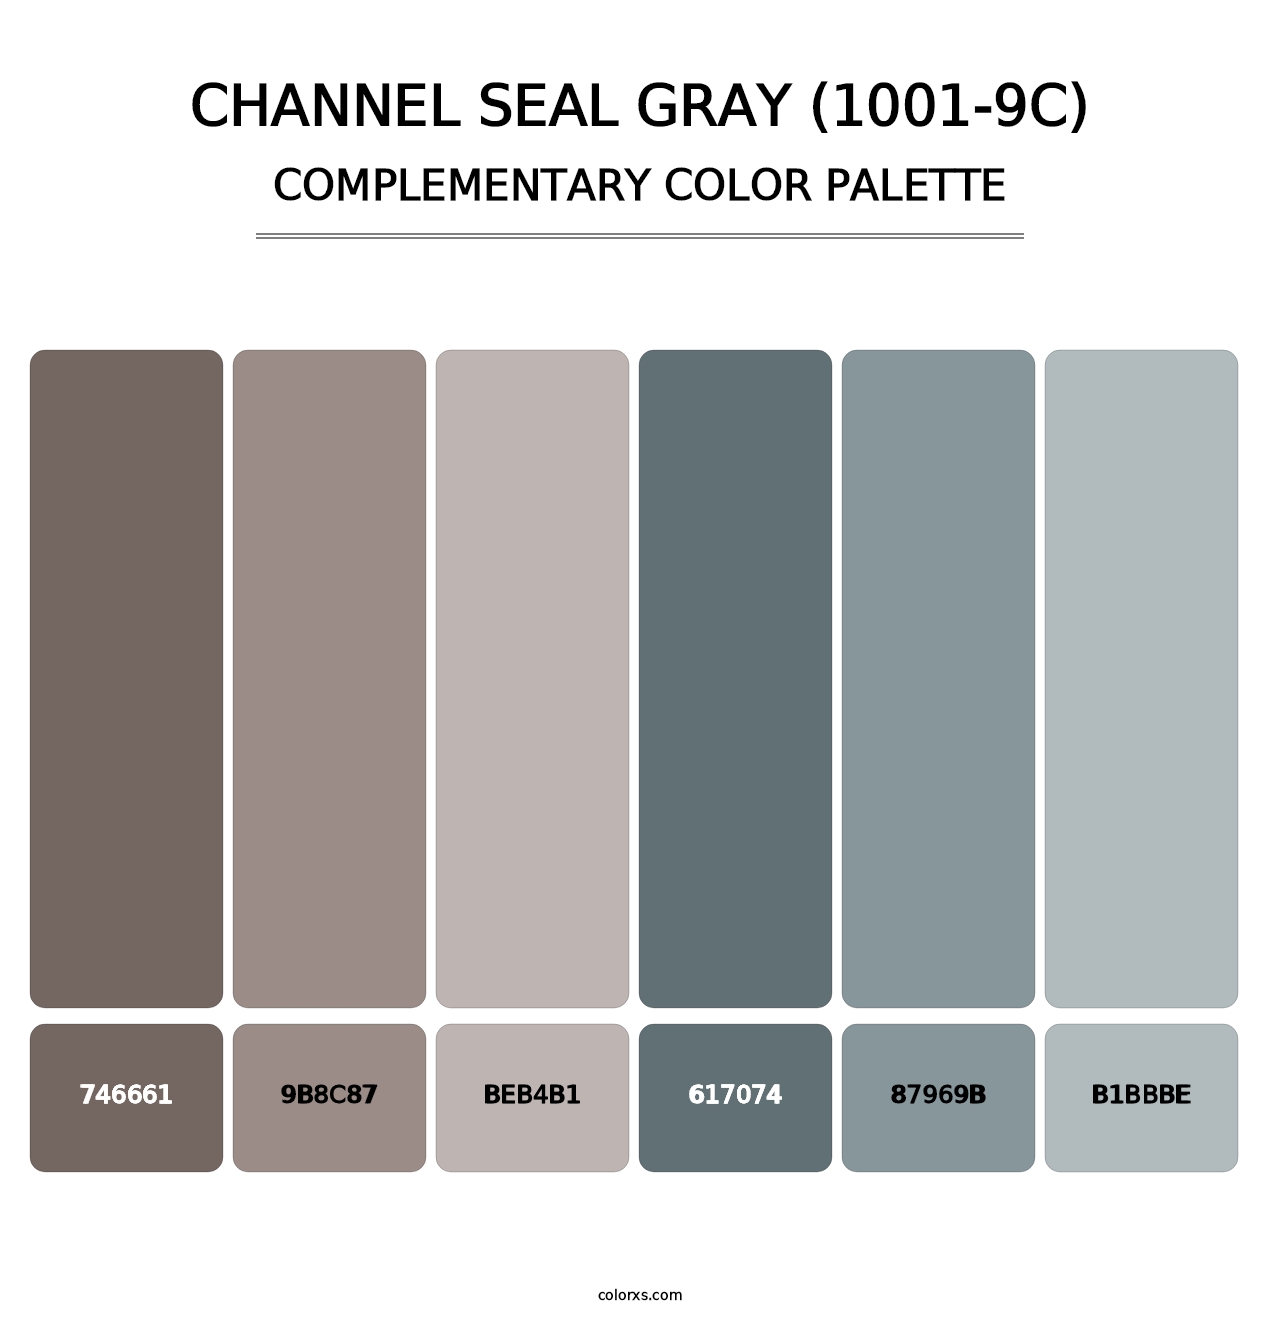 Channel Seal Gray (1001-9C) - Complementary Color Palette